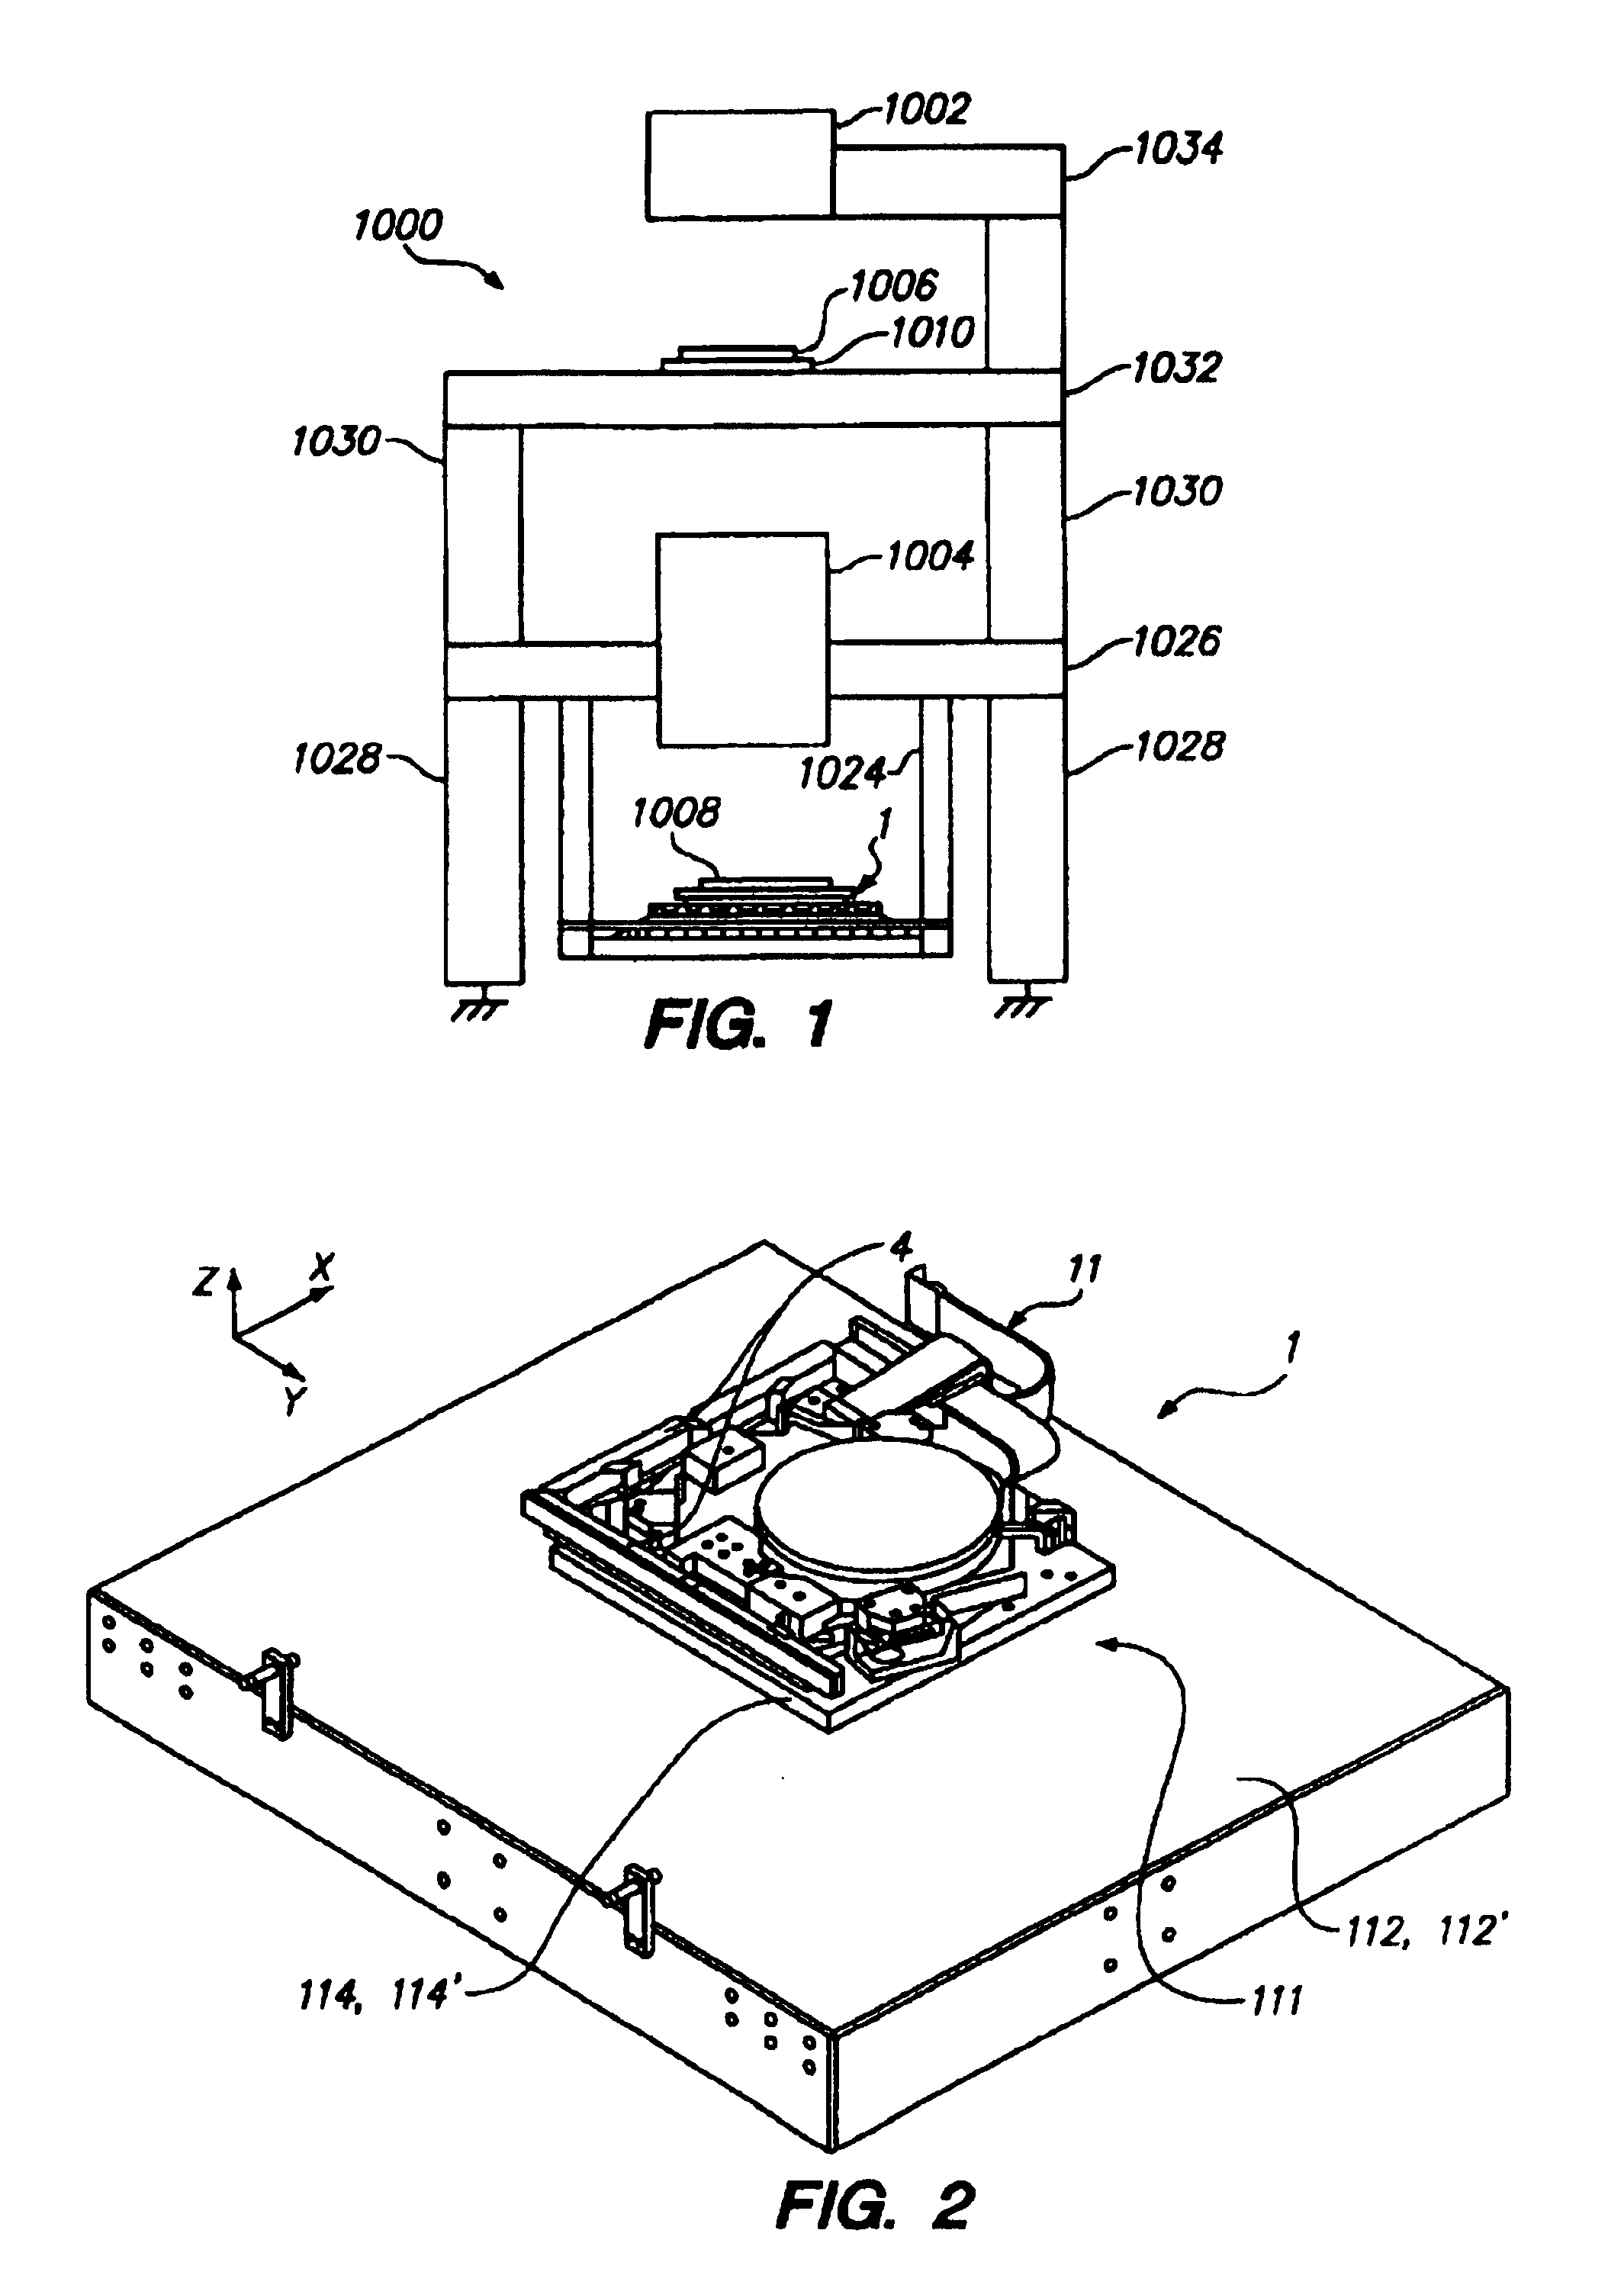 Wafer positioner with planar motor and mag-lev fine stage